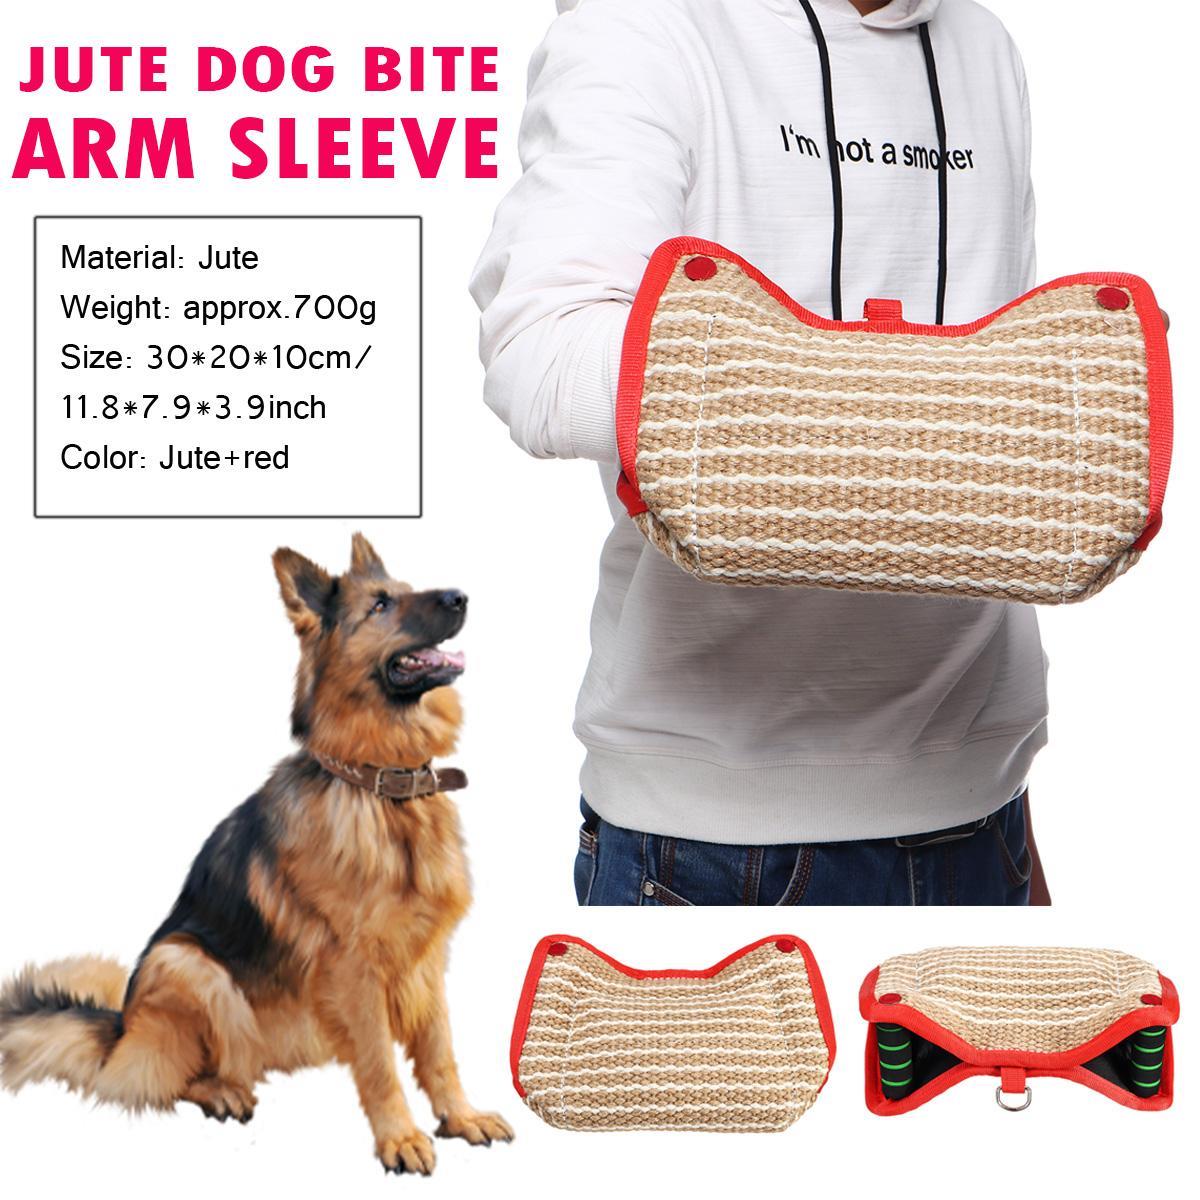 Jute Dog Bite Protection Arm Sleeve for Puppy Young Dogs Training fit Pitbull German Shepherd Puppy Biting